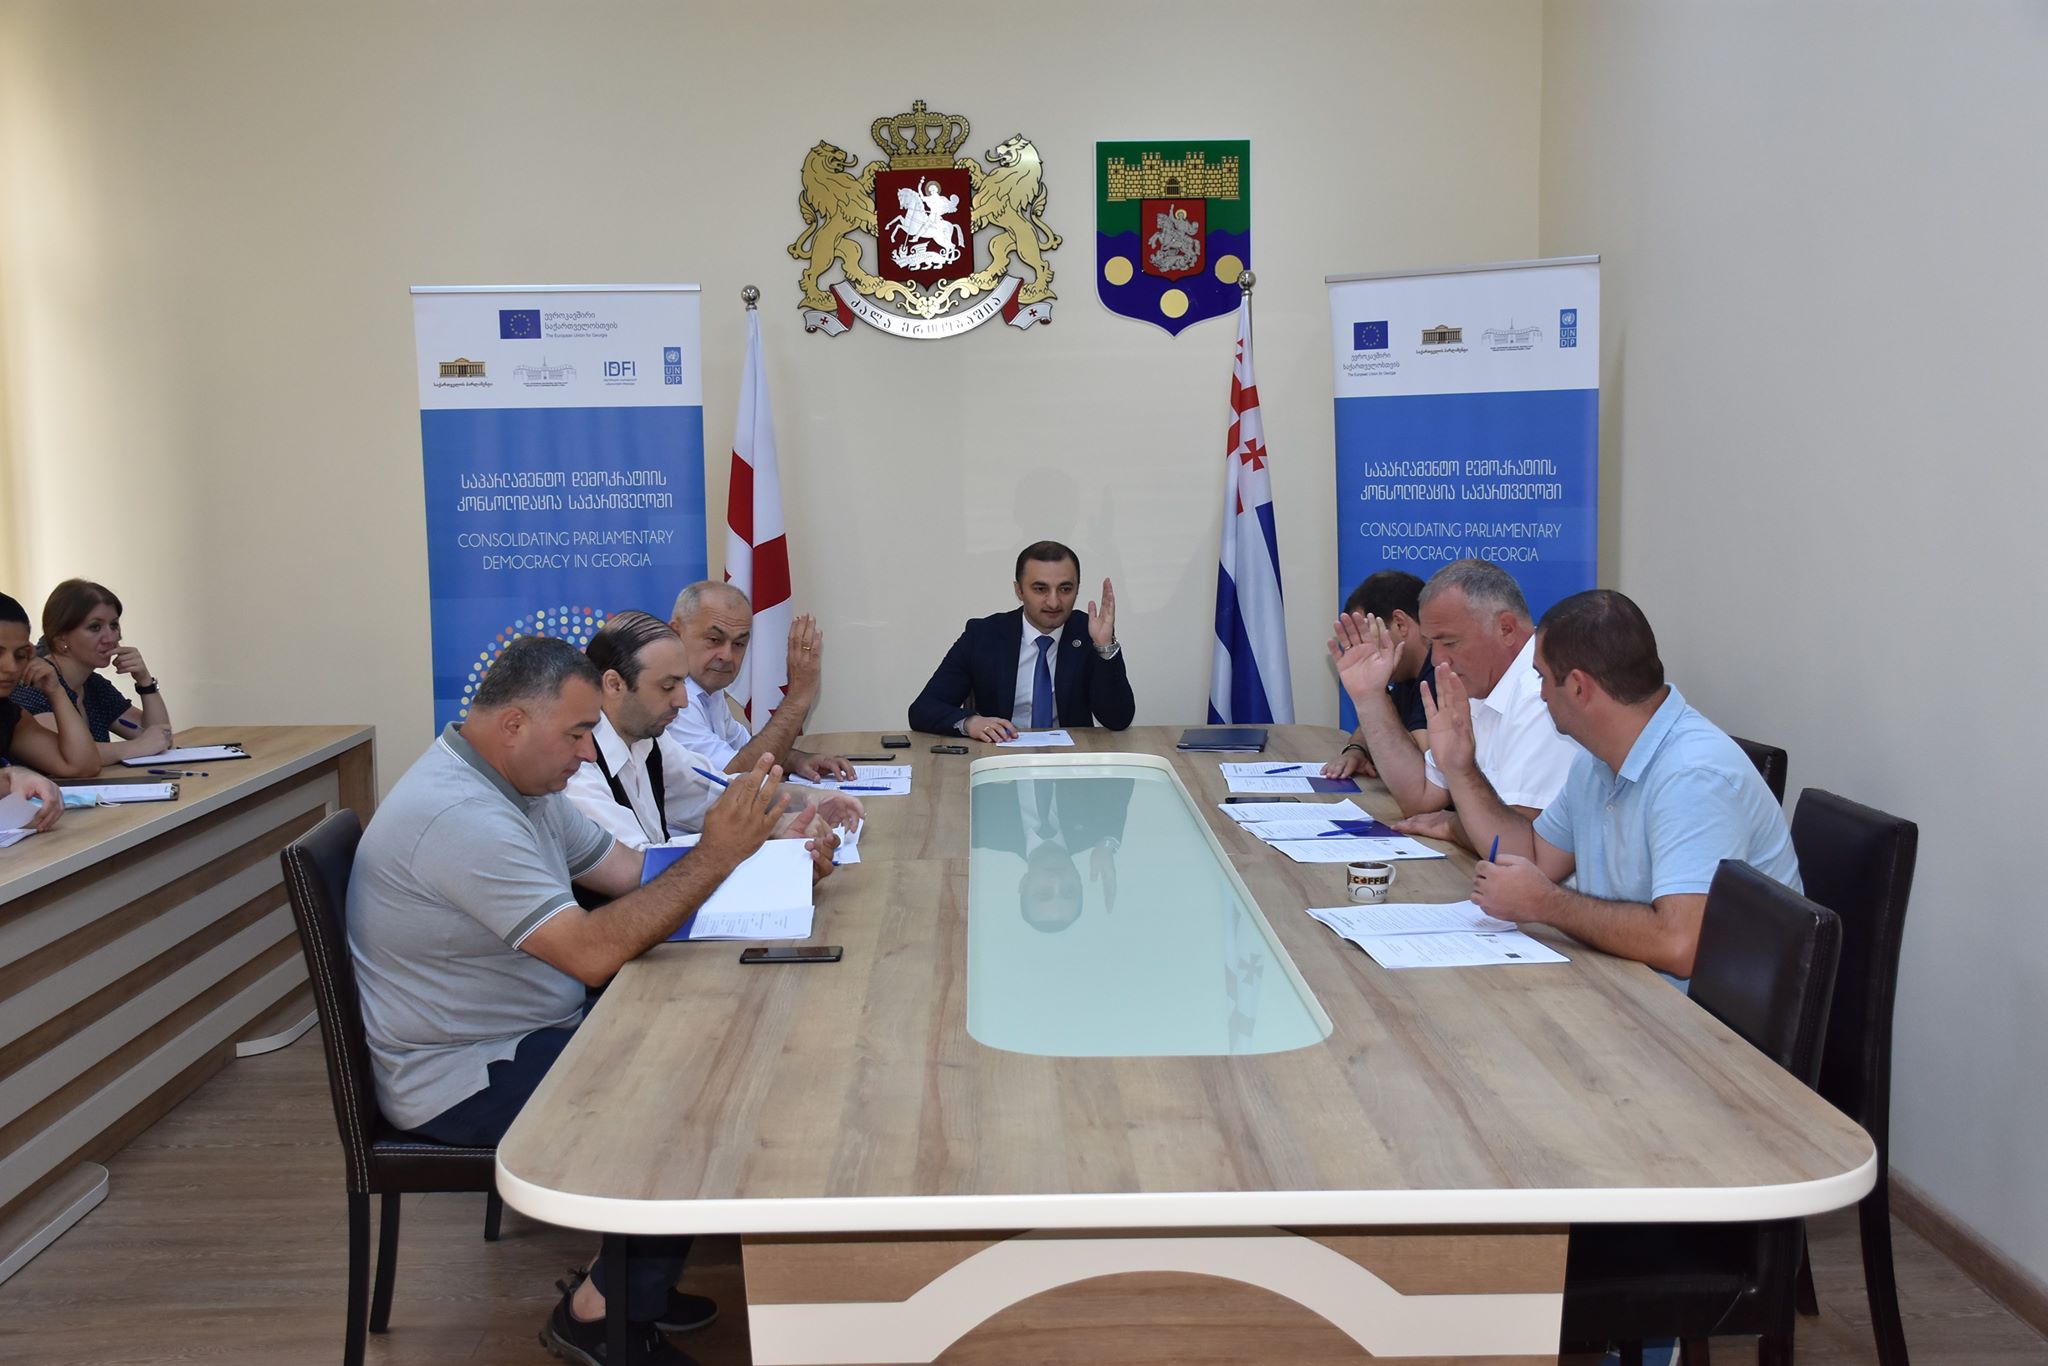 2020-2021 Action Plan of the Adjara Supreme Council Open Government has been approved 